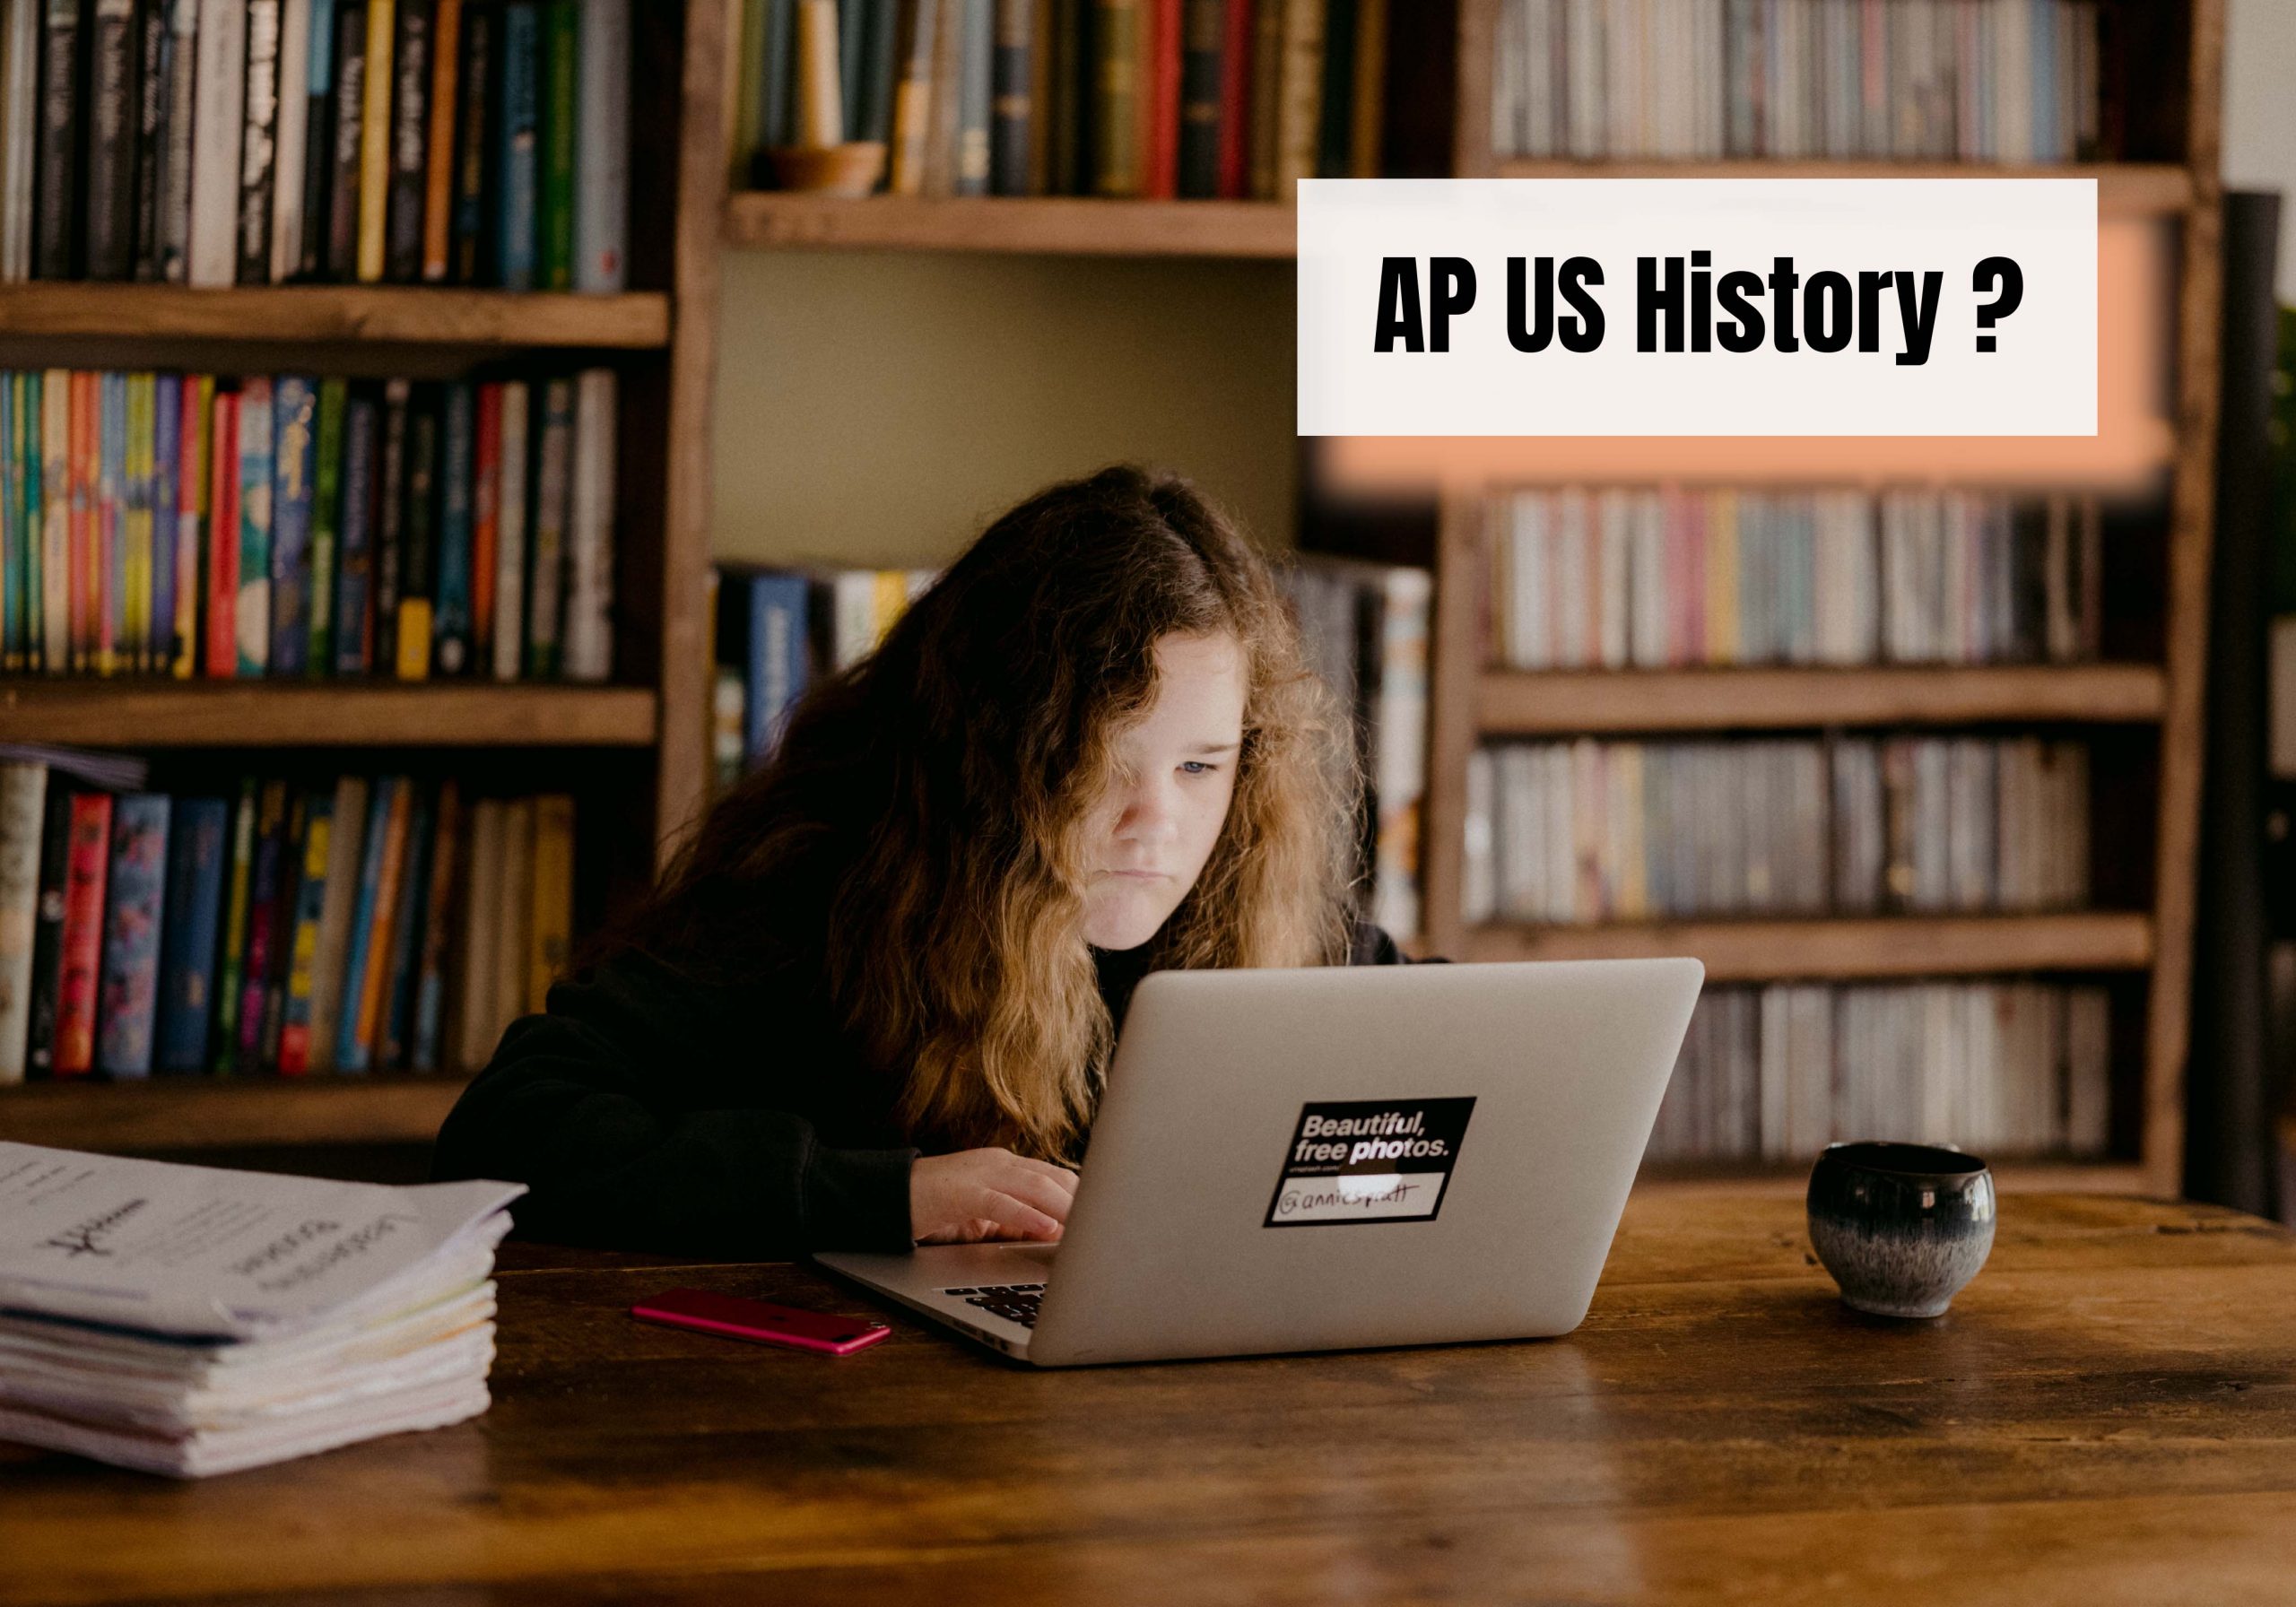 https://www.giasuib.com/en/how-many-periods-are-there-in-ap-us-history/